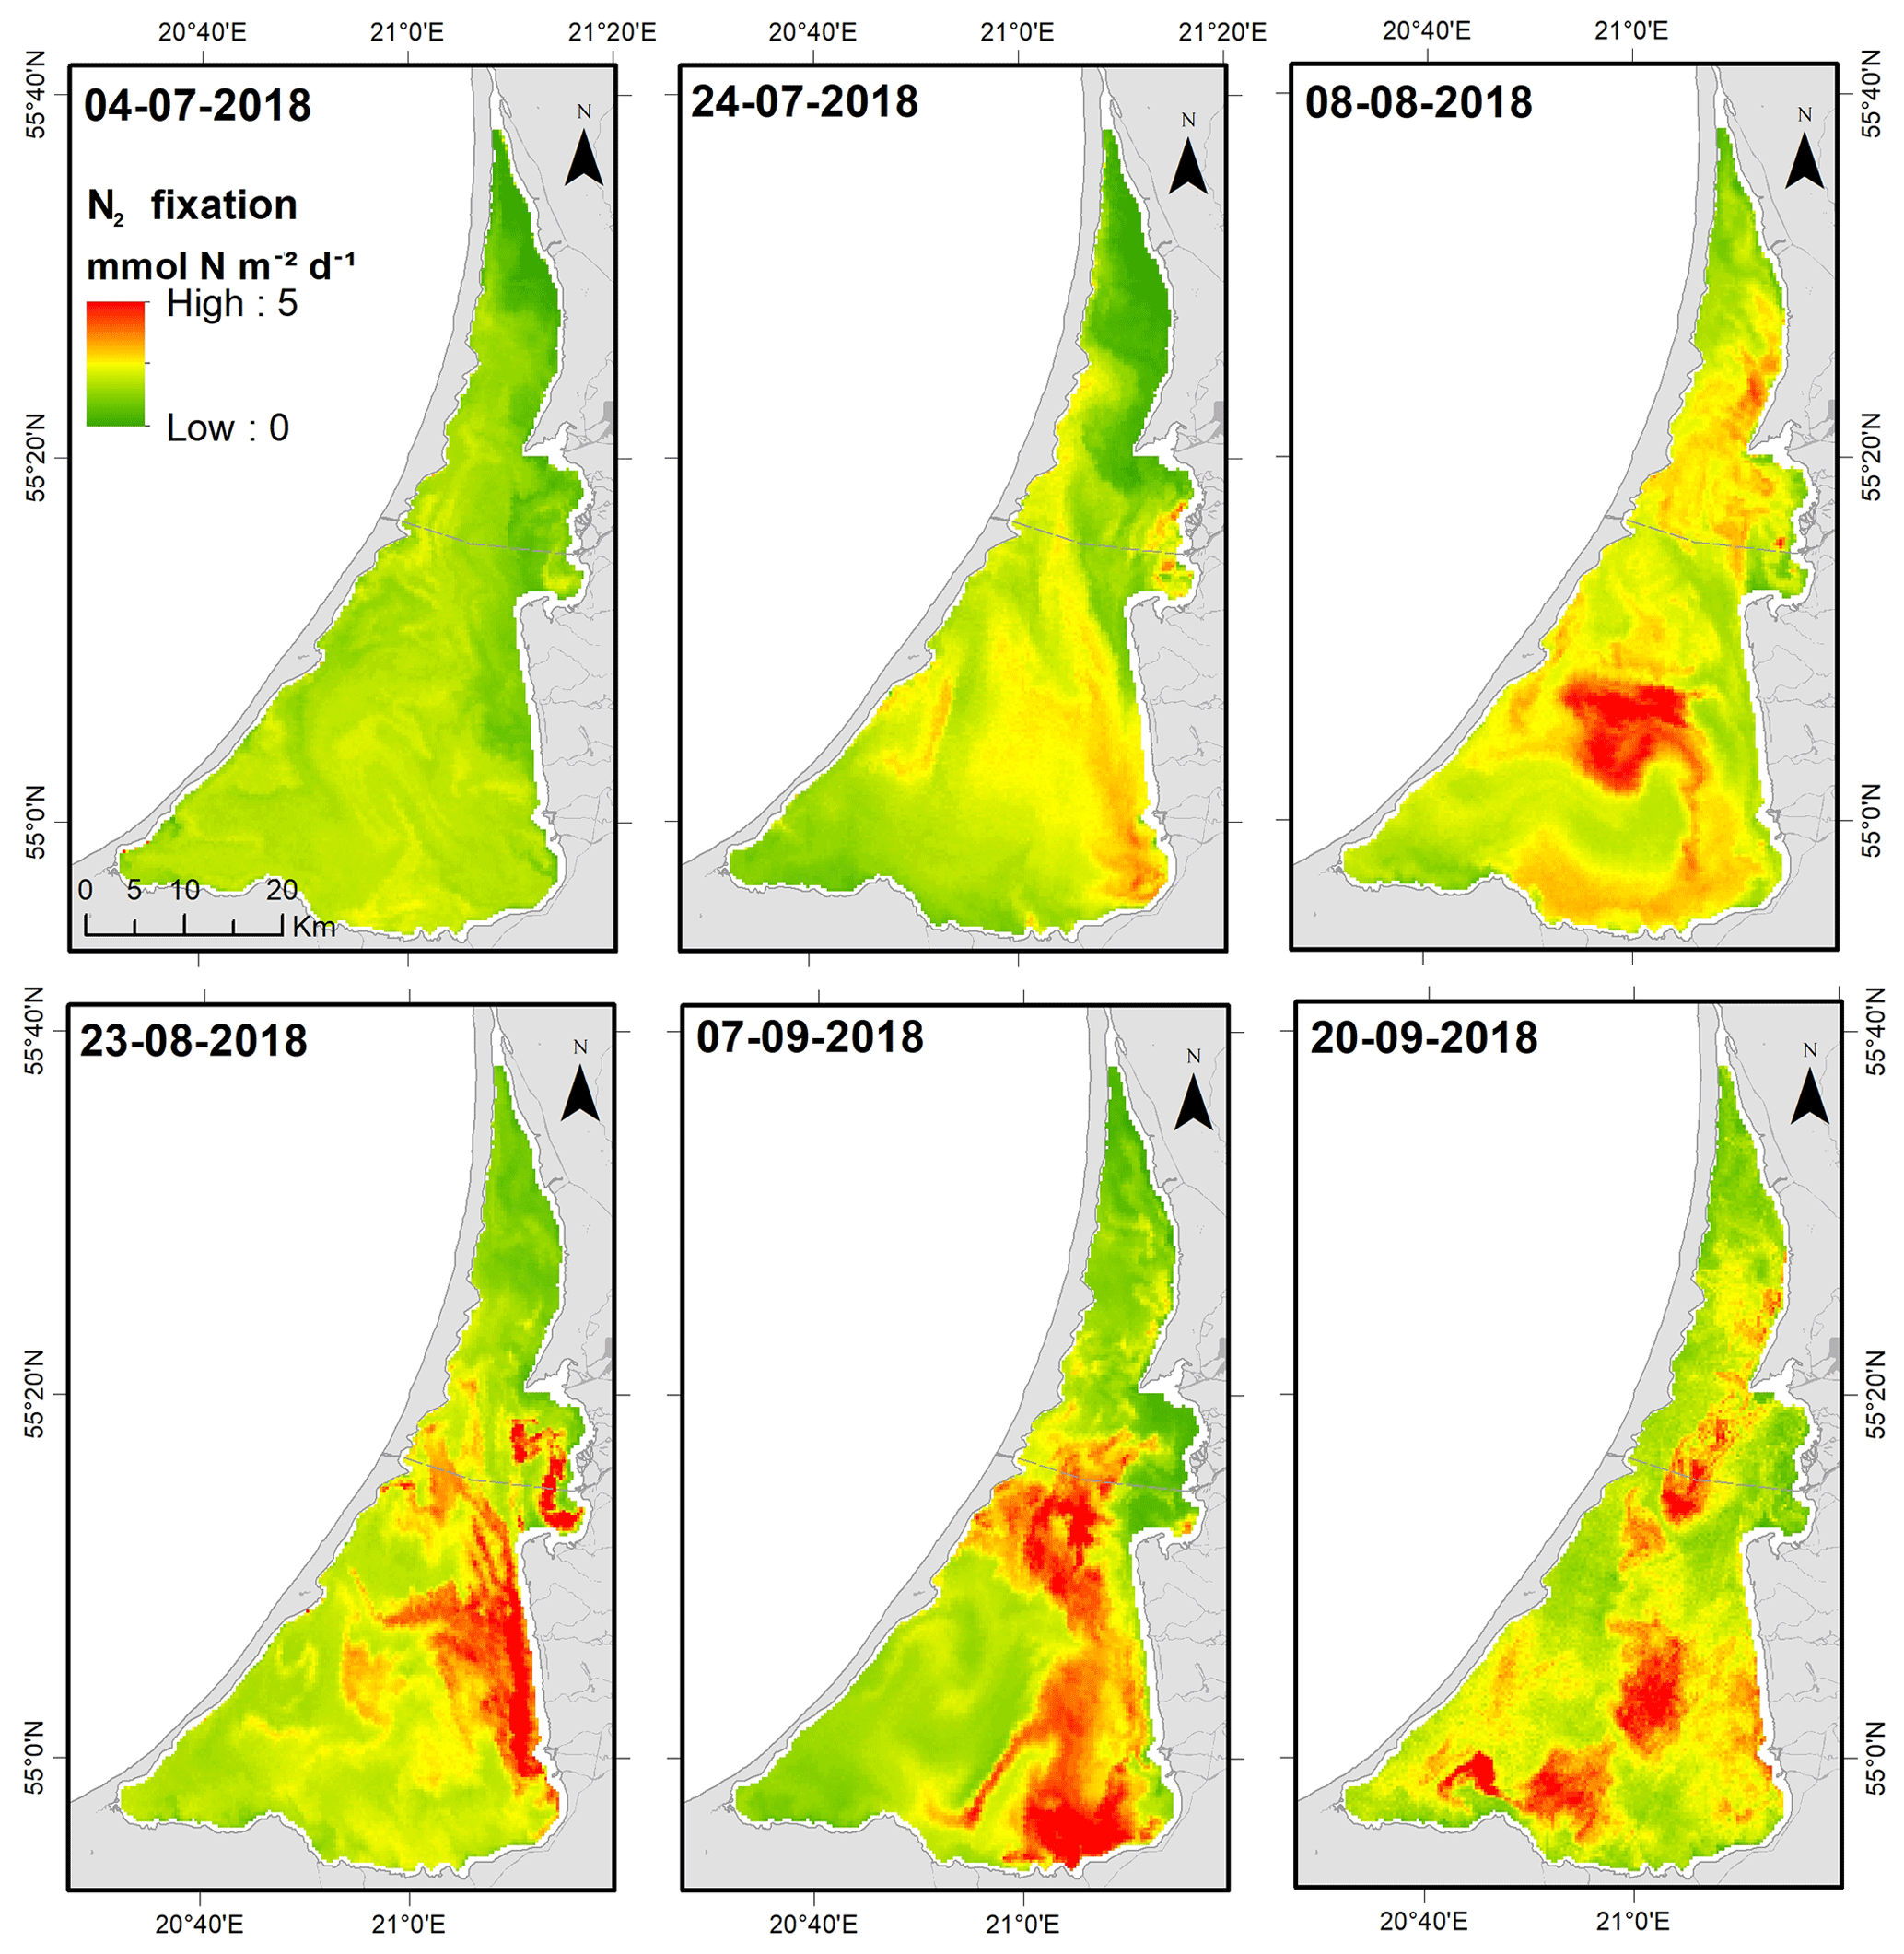 Bg Spatiotemporal Patterns Of N2 Fixation In Coastal Waters Derived From Rate Measurements And Remote Sensing